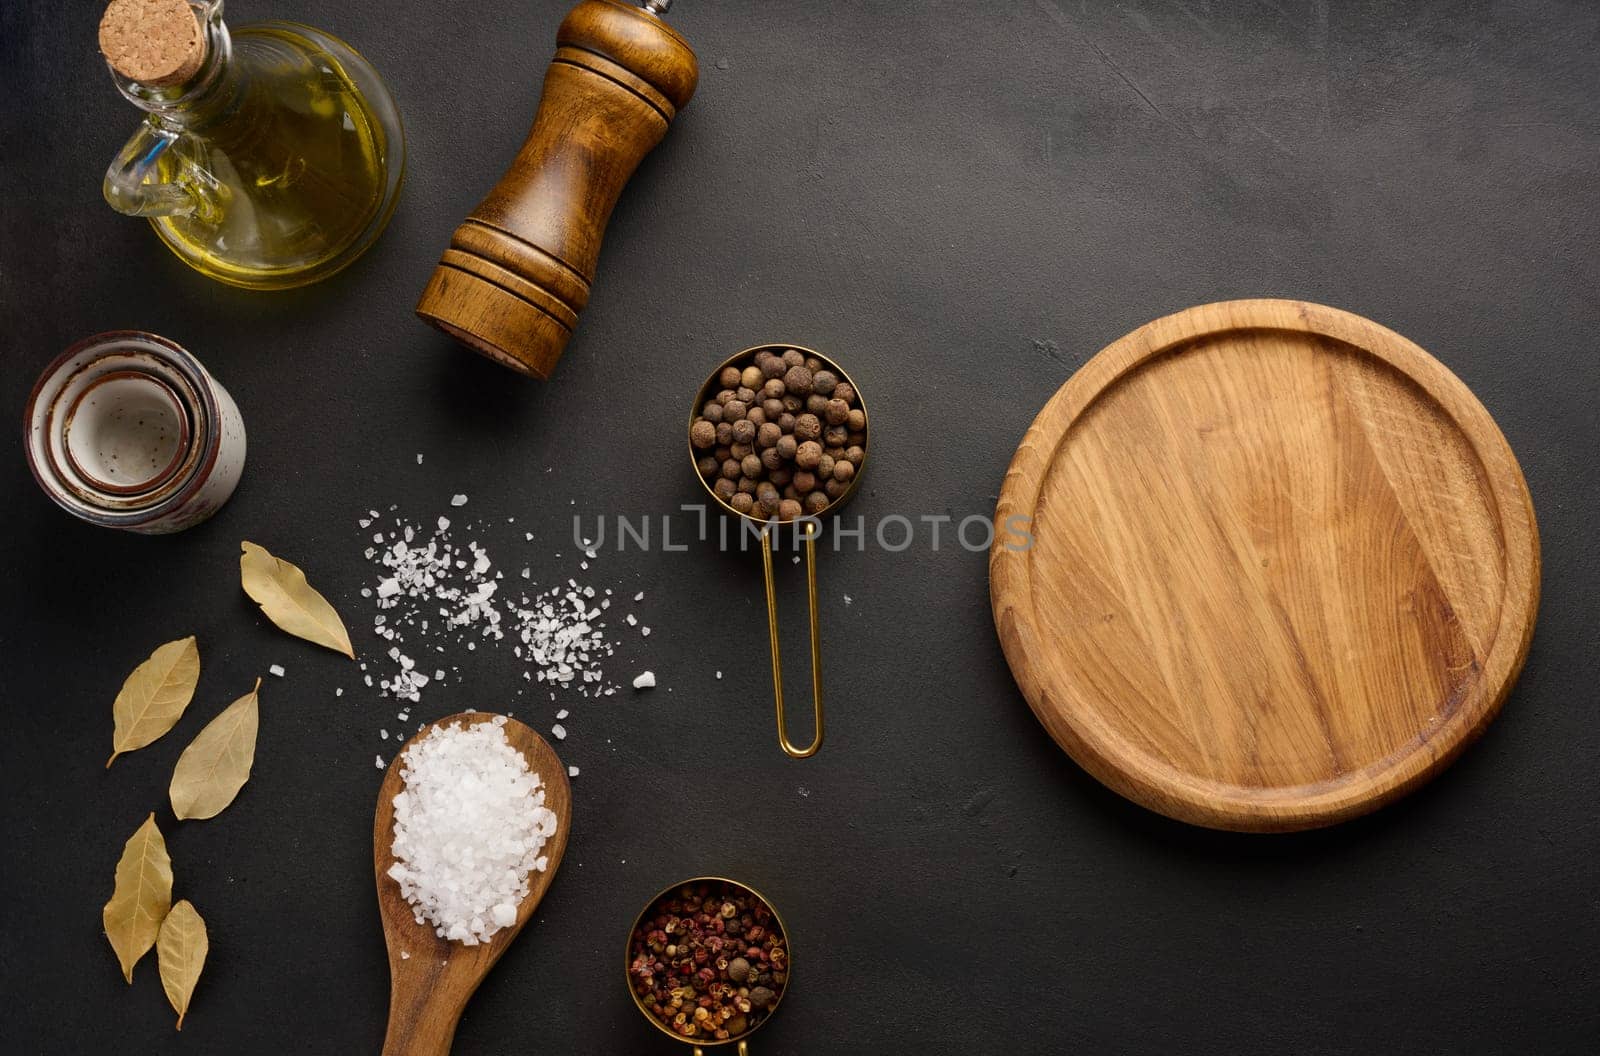 Salt, allspice, peppercorns and olive oil in a bottle on a black table by ndanko